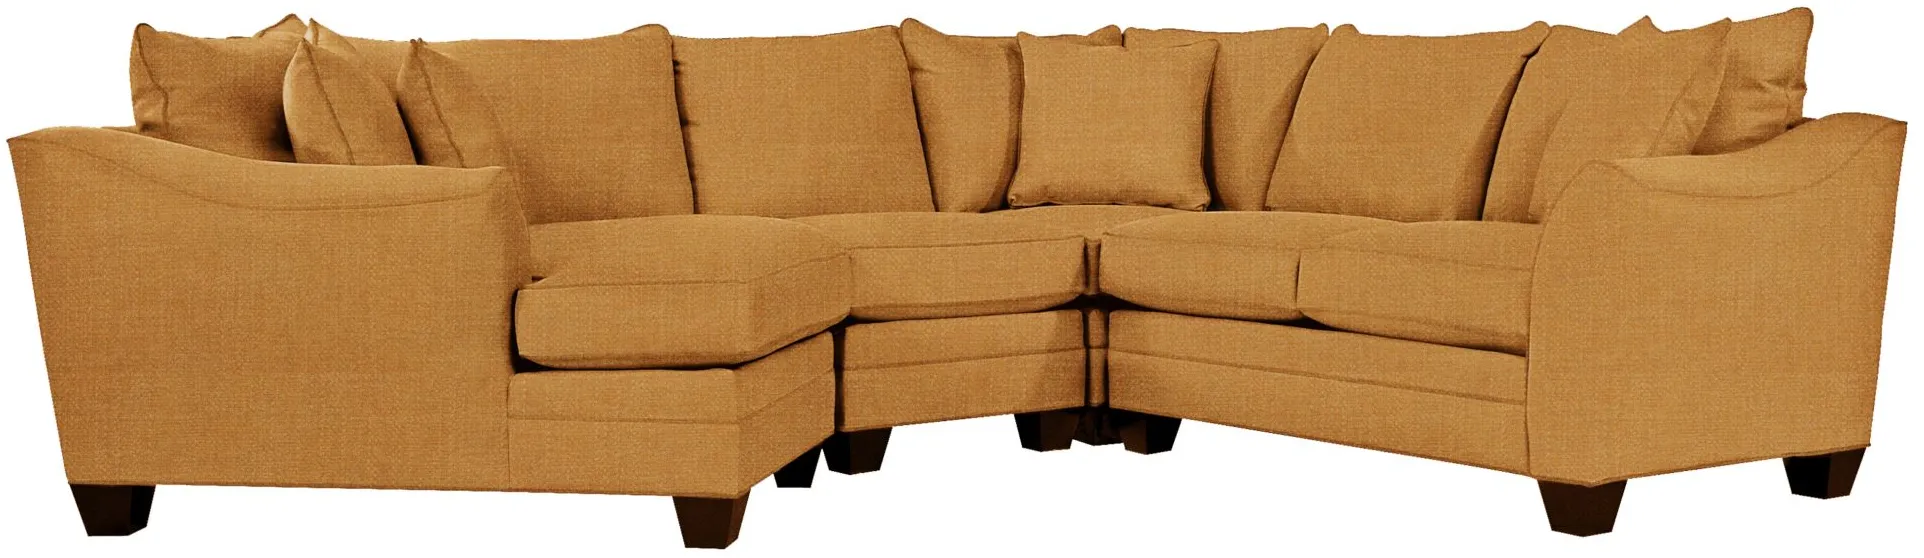 Foresthill 4-pc. Left Hand Cuddler Sectional Sofa in Elliot Sunflower by H.M. Richards